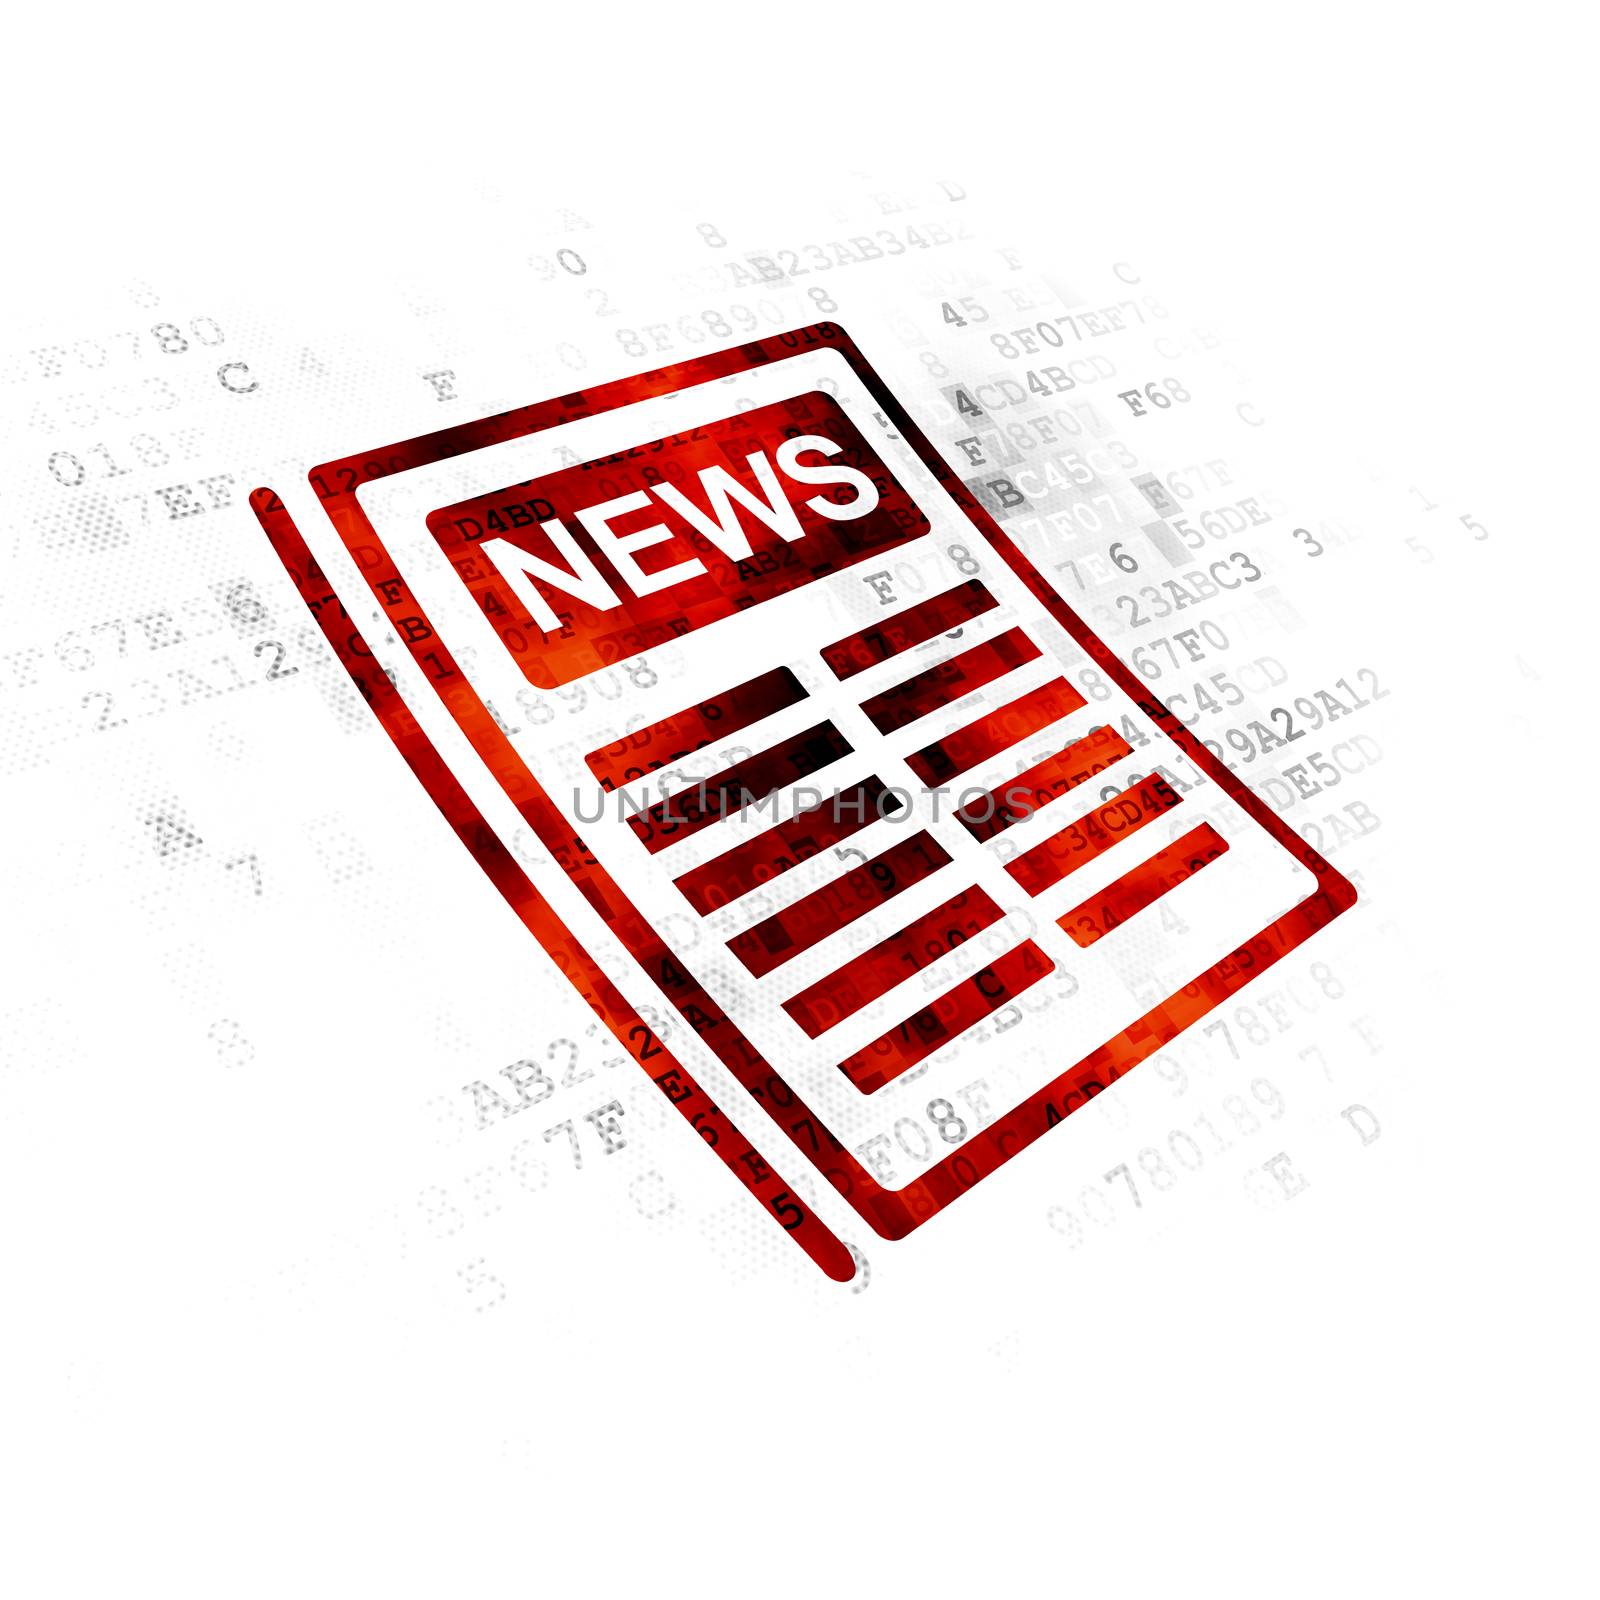 News concept: Pixelated red Newspaper icon on Digital background